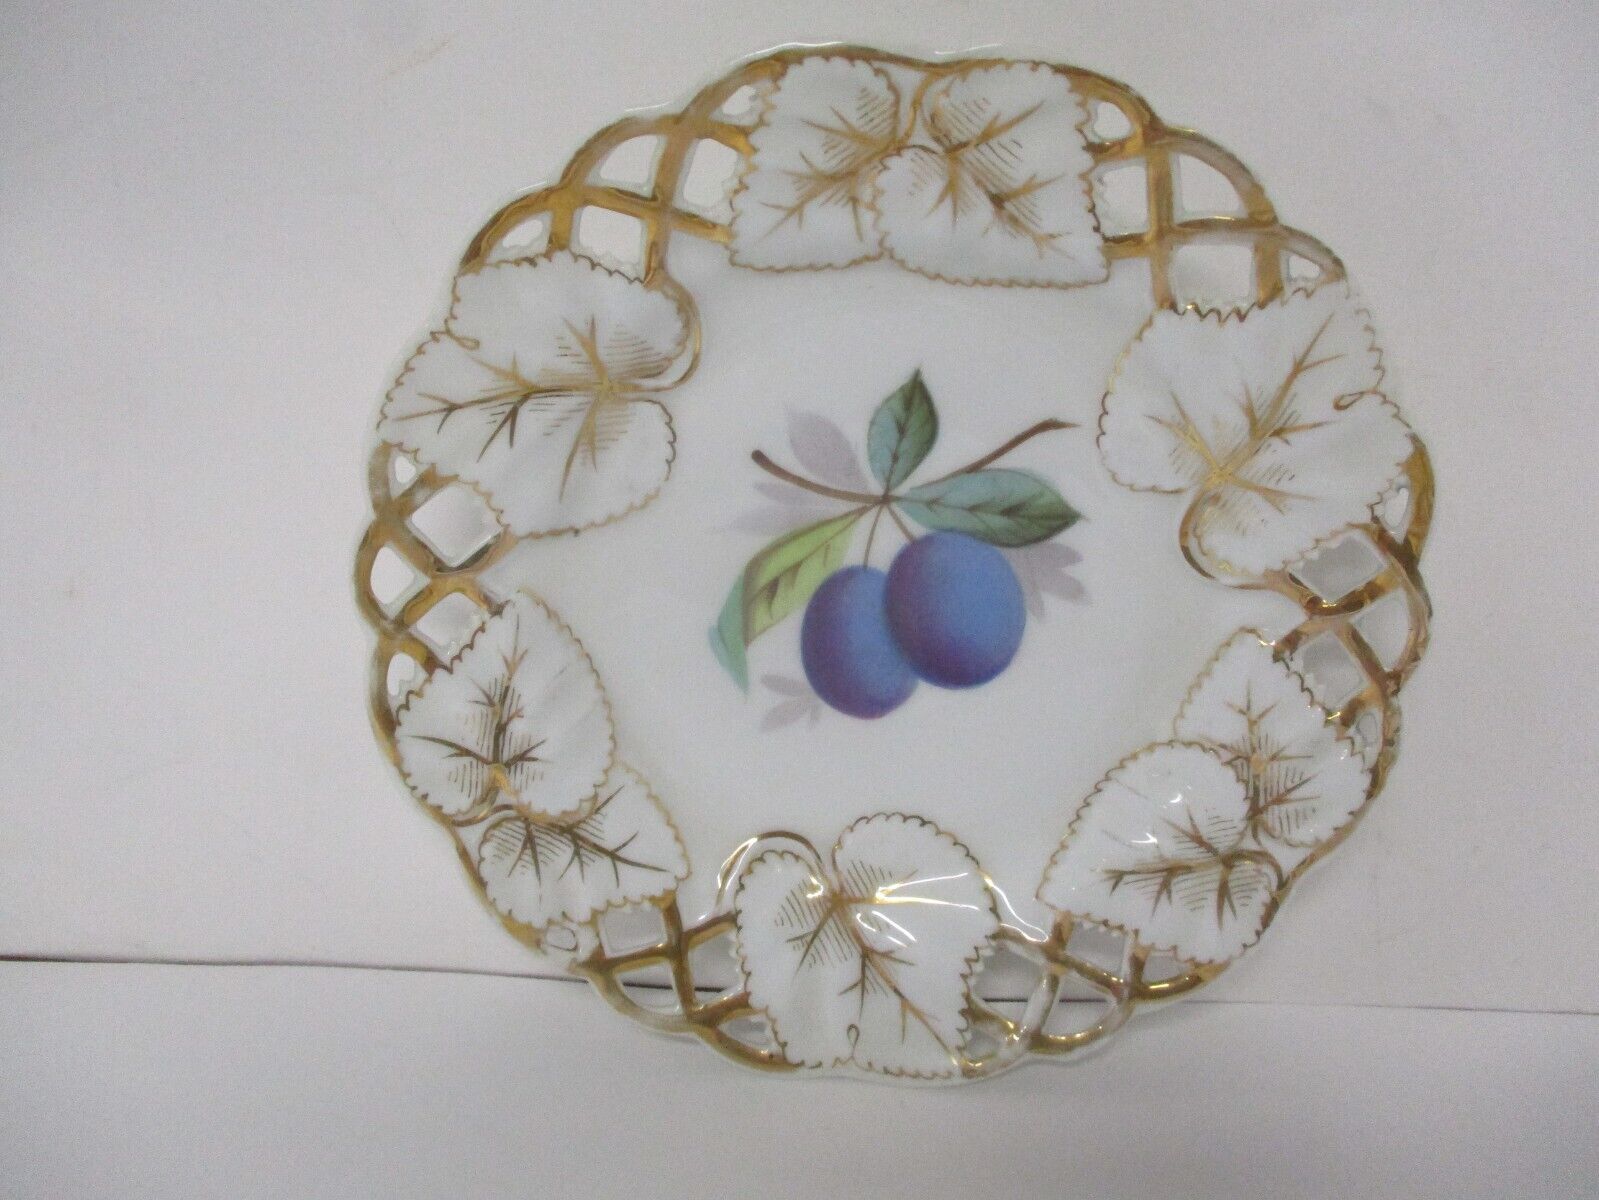 Vintage Hand Painted Plums and Gold Trim Reticulated Pierced Edge Plate